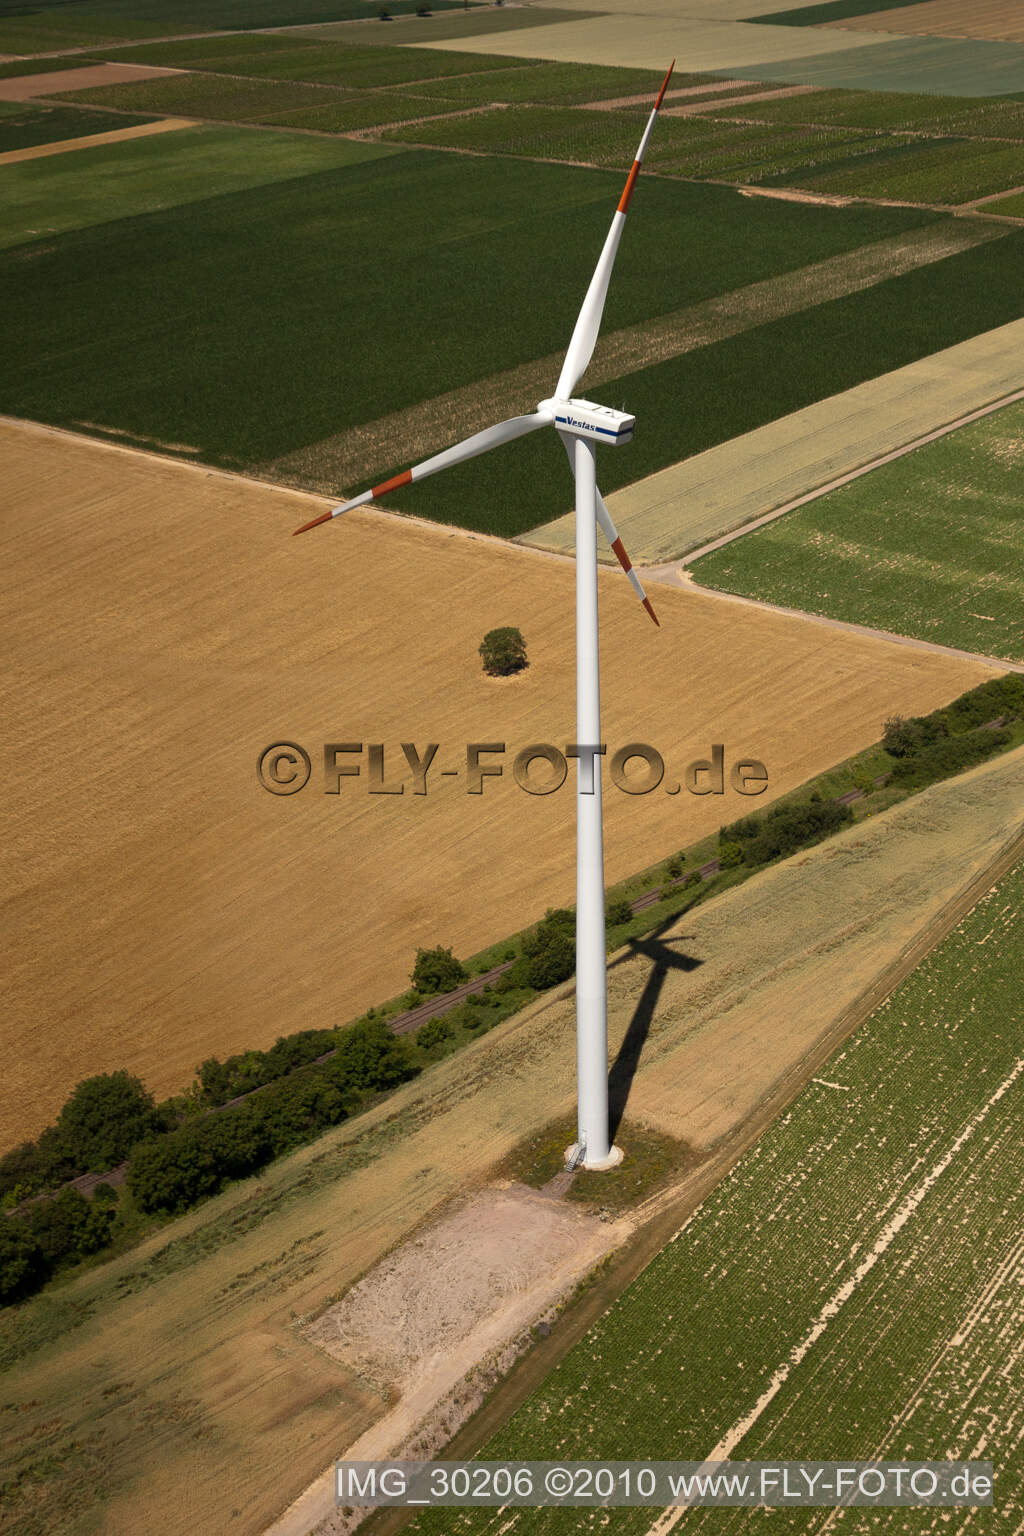 Aerial view of Wind turbines in Offenbach an der Queich in the state Rhineland-Palatinate, Germany